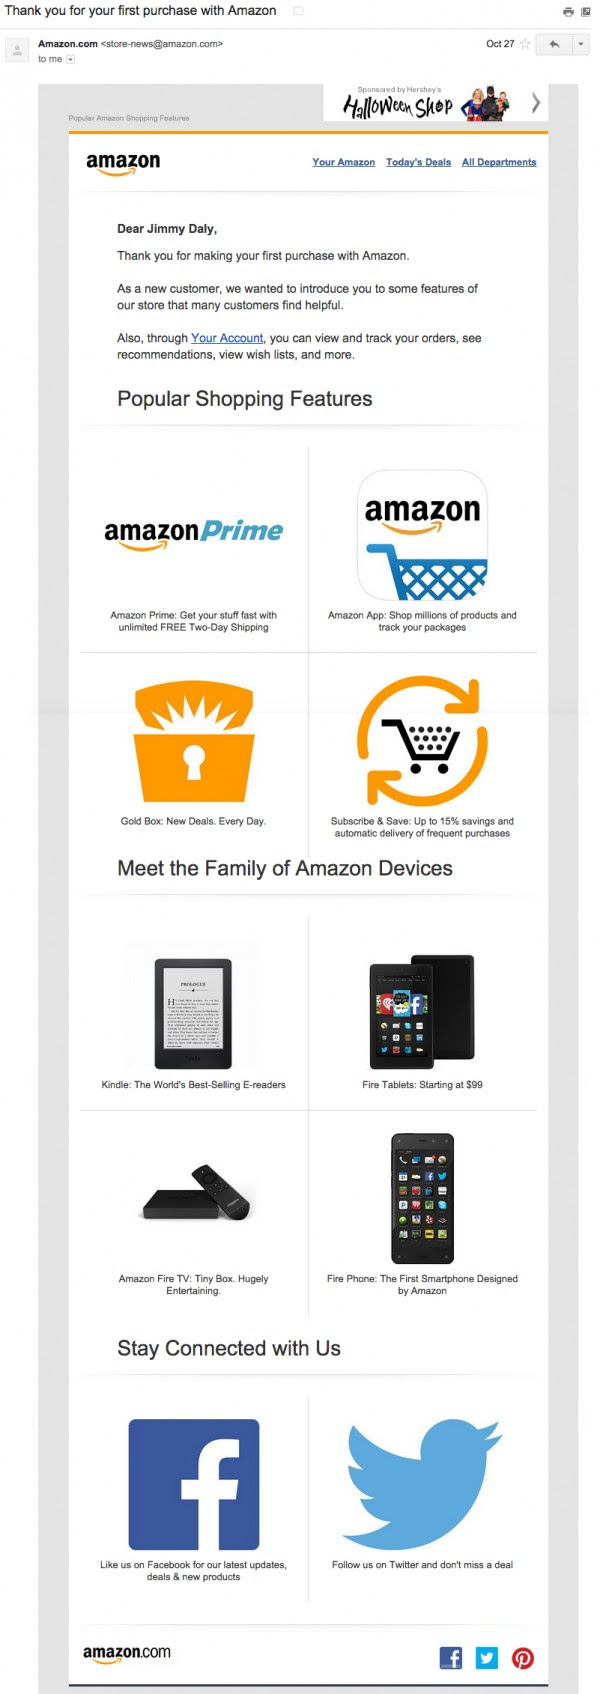 amazon-thank-you-email